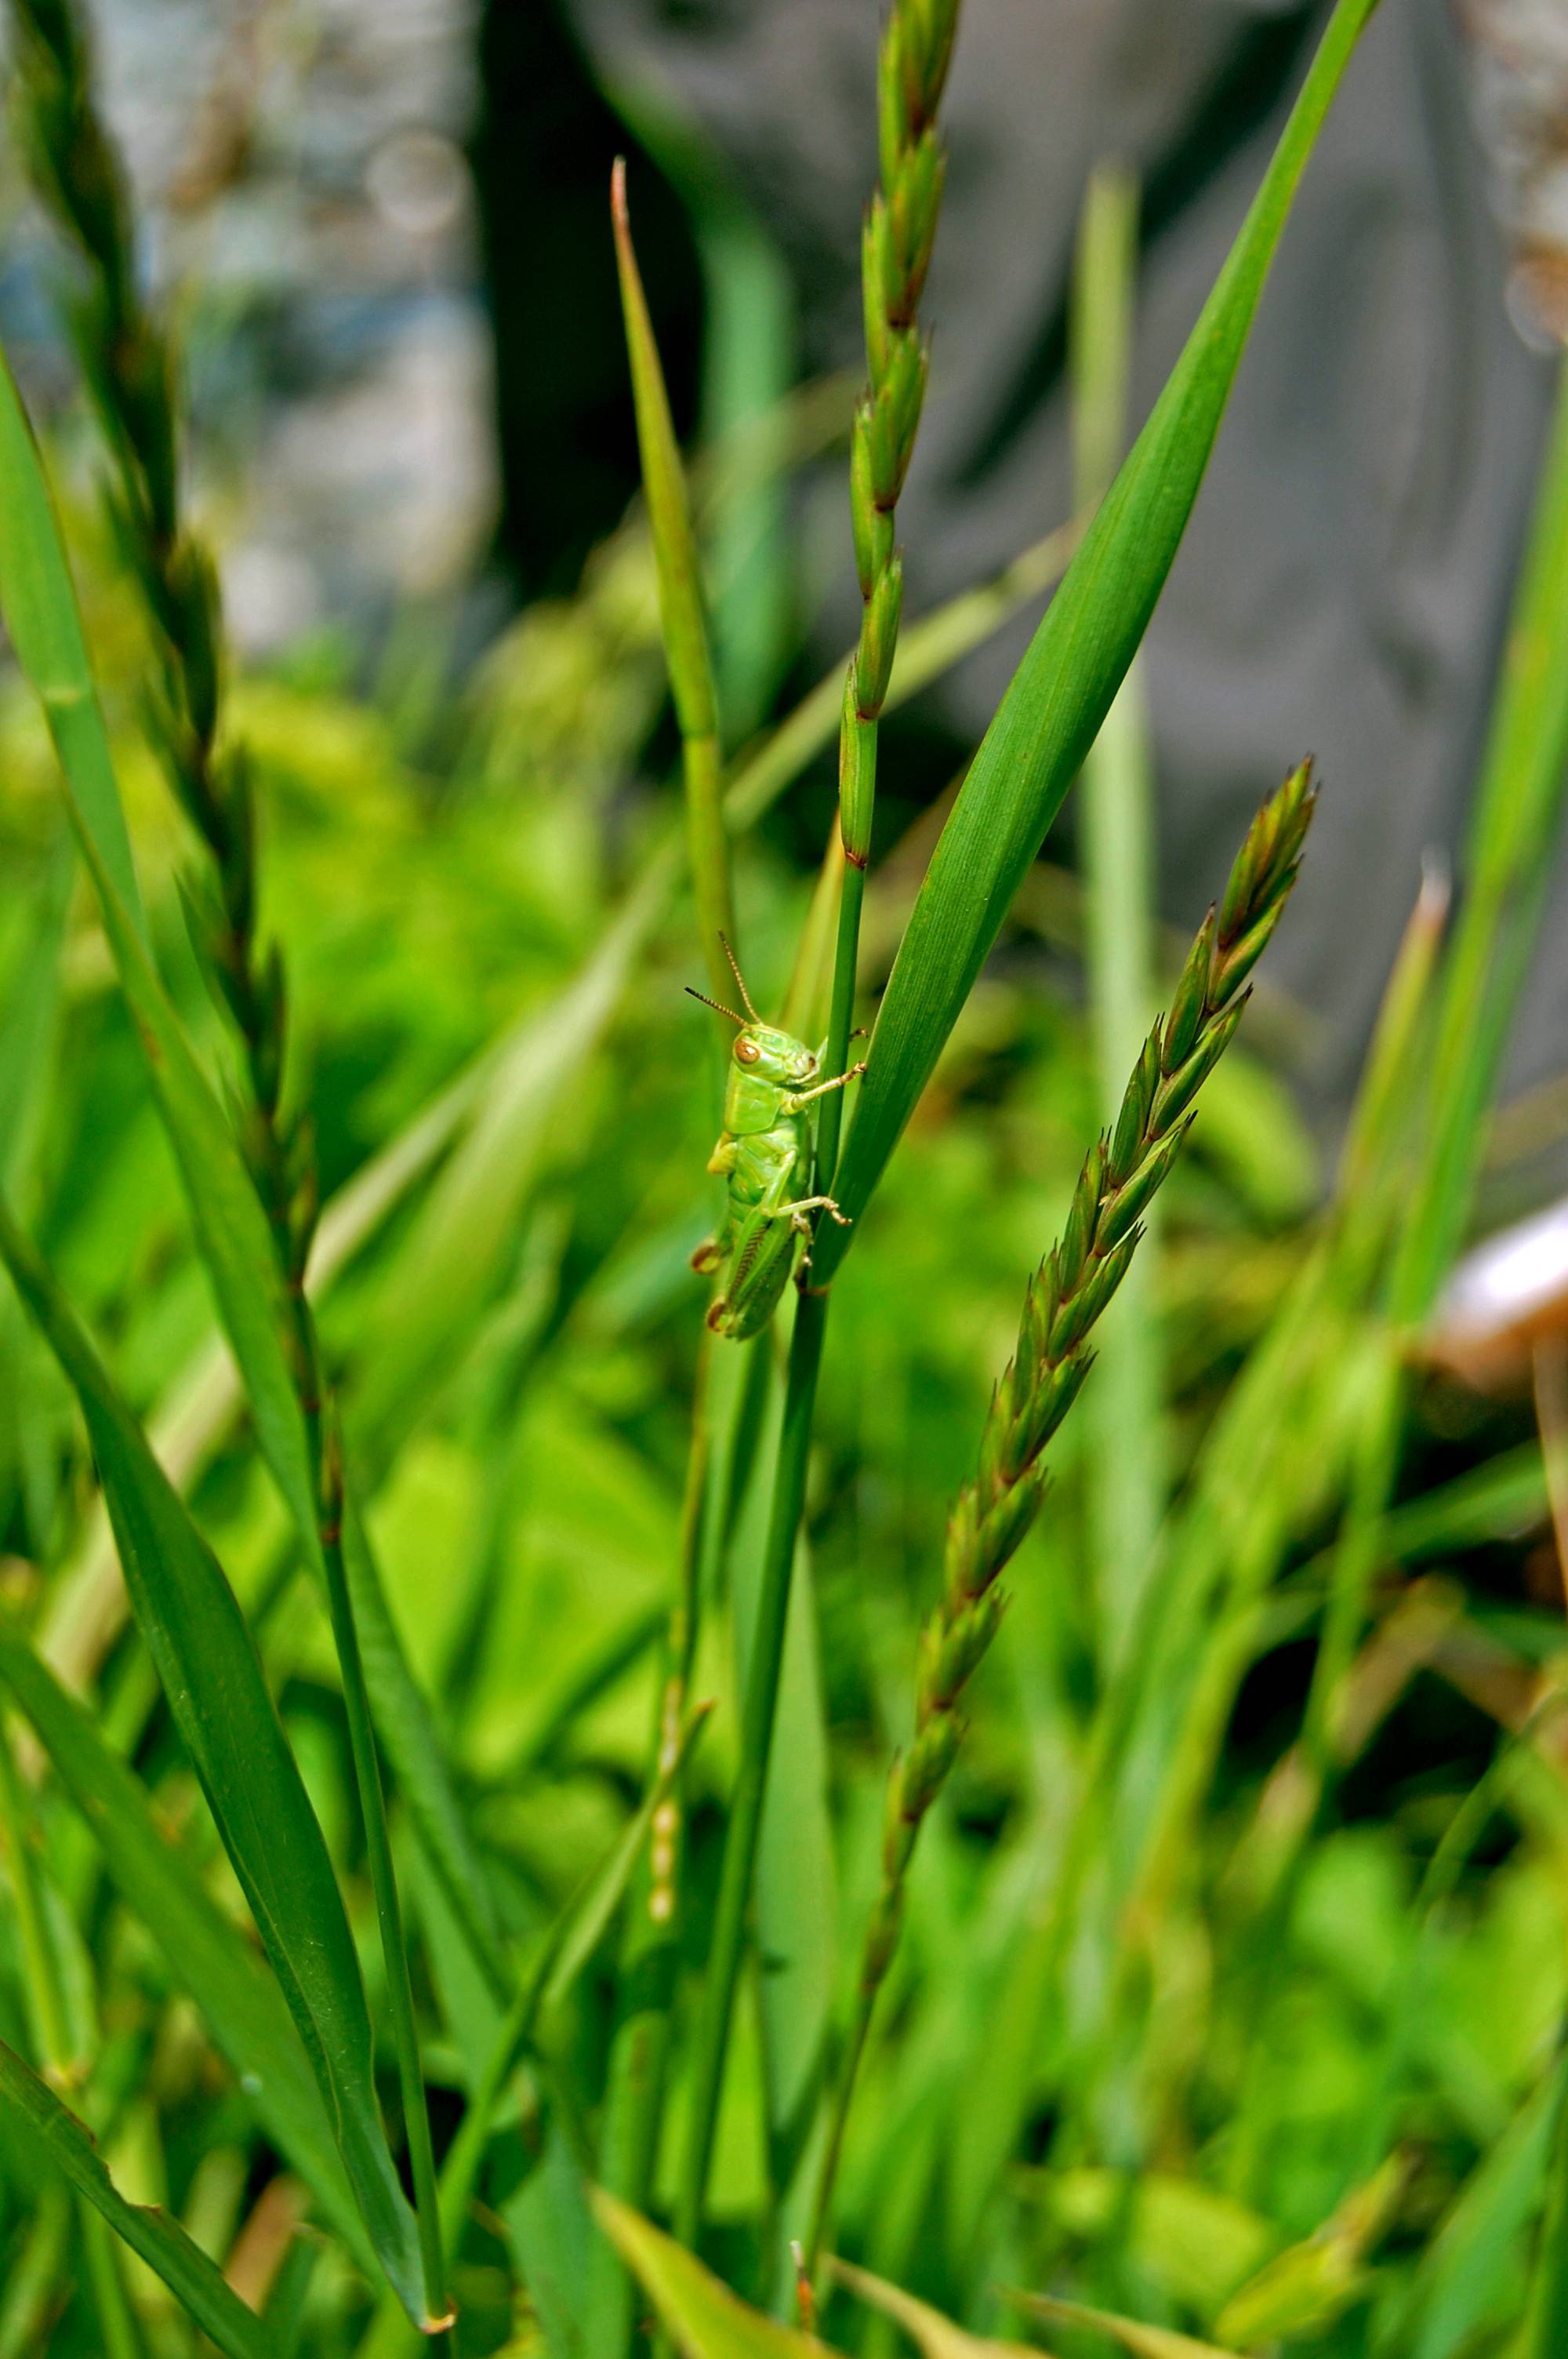 olive-lime spikelets with green foliage